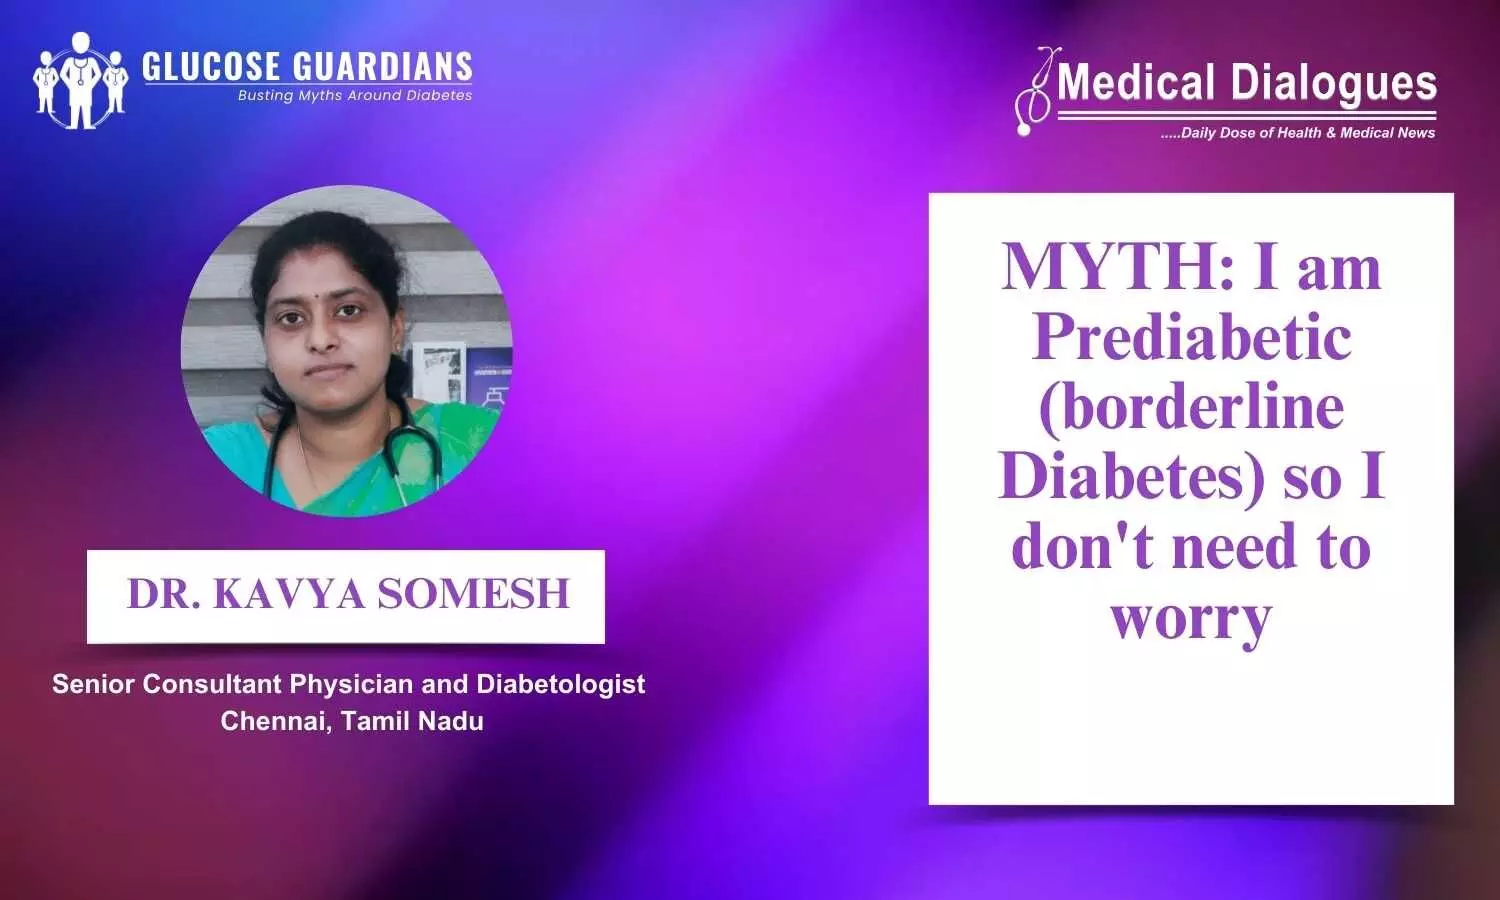 Dispelling Misconceptions About Borderline Diabetes - Dr Kavya Somesh